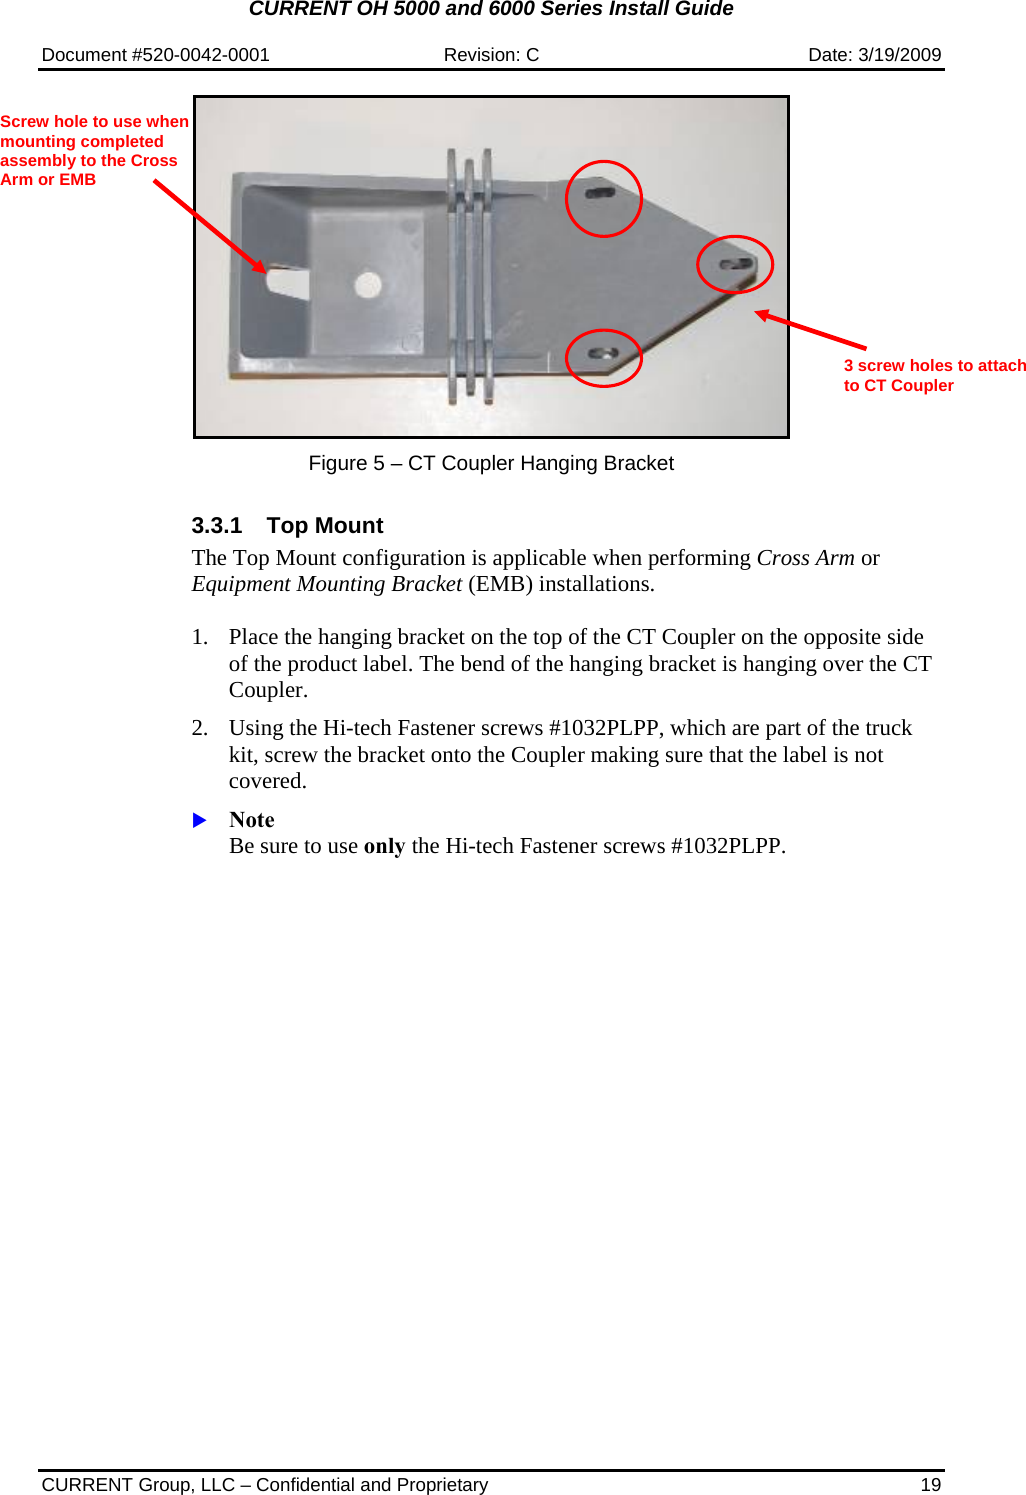 CURRENT OH 5000 and 6000 Series Install Guide  Document #520-0042-0001  Revision: C  Date: 3/19/2009  CURRENT Group, LLC – Confidential and Proprietary  19   Figure 5 – CT Coupler Hanging Bracket    3.3.1 Top Mount The Top Mount configuration is applicable when performing Cross Arm or Equipment Mounting Bracket (EMB) installations.  1. Place the hanging bracket on the top of the CT Coupler on the opposite side of the product label. The bend of the hanging bracket is hanging over the CT Coupler.   2. Using the Hi-tech Fastener screws #1032PLPP, which are part of the truck kit, screw the bracket onto the Coupler making sure that the label is not covered.   X Note Be sure to use only the Hi-tech Fastener screws #1032PLPP. 3 screw holes to attach to CT Coupler Screw hole to use when mounting completed assembly to the Cross Arm or EMB 